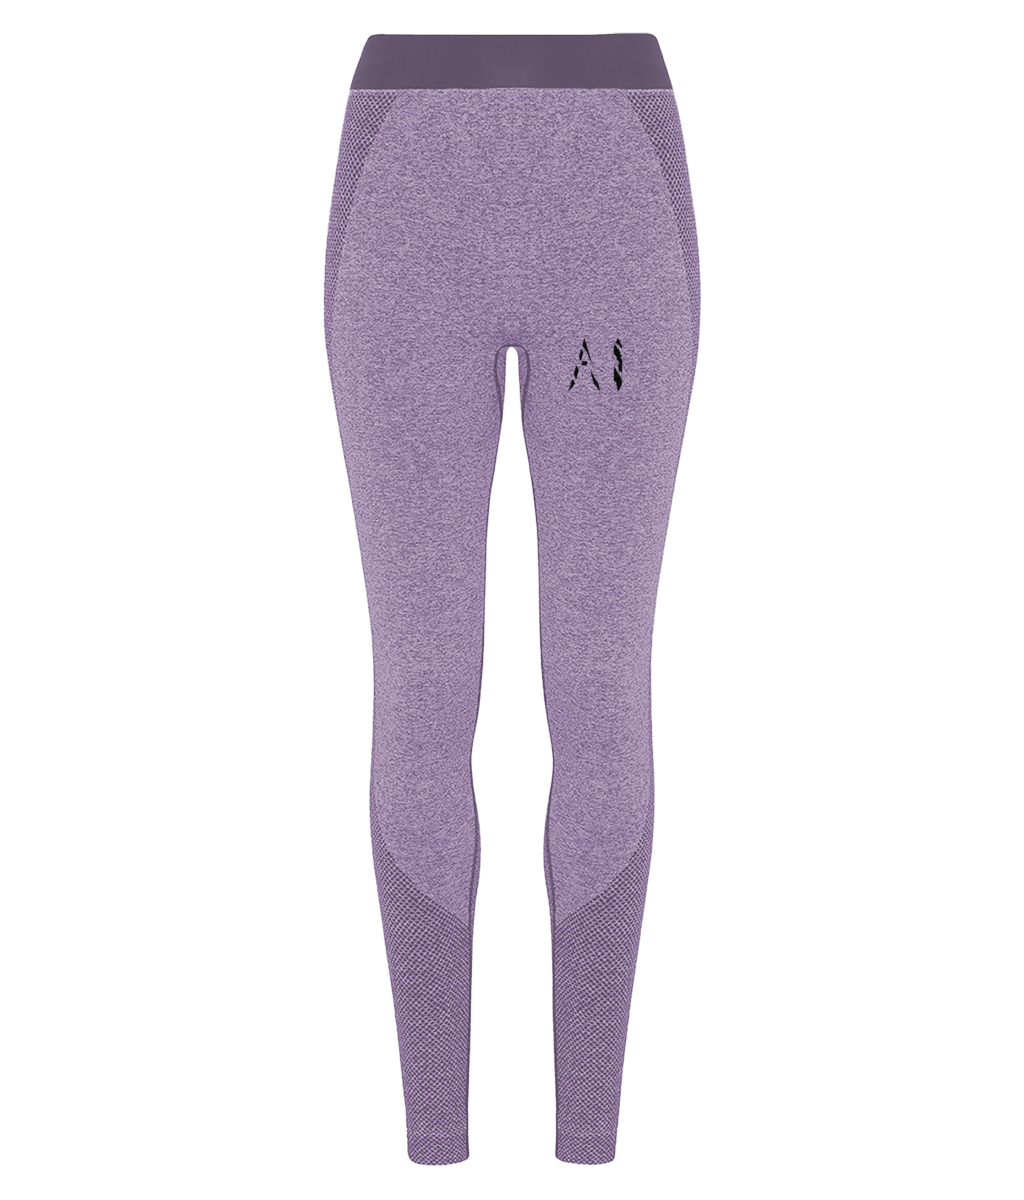 Womens purple Athletic Seamless Sports Leggings with black AI logo on upper thigh